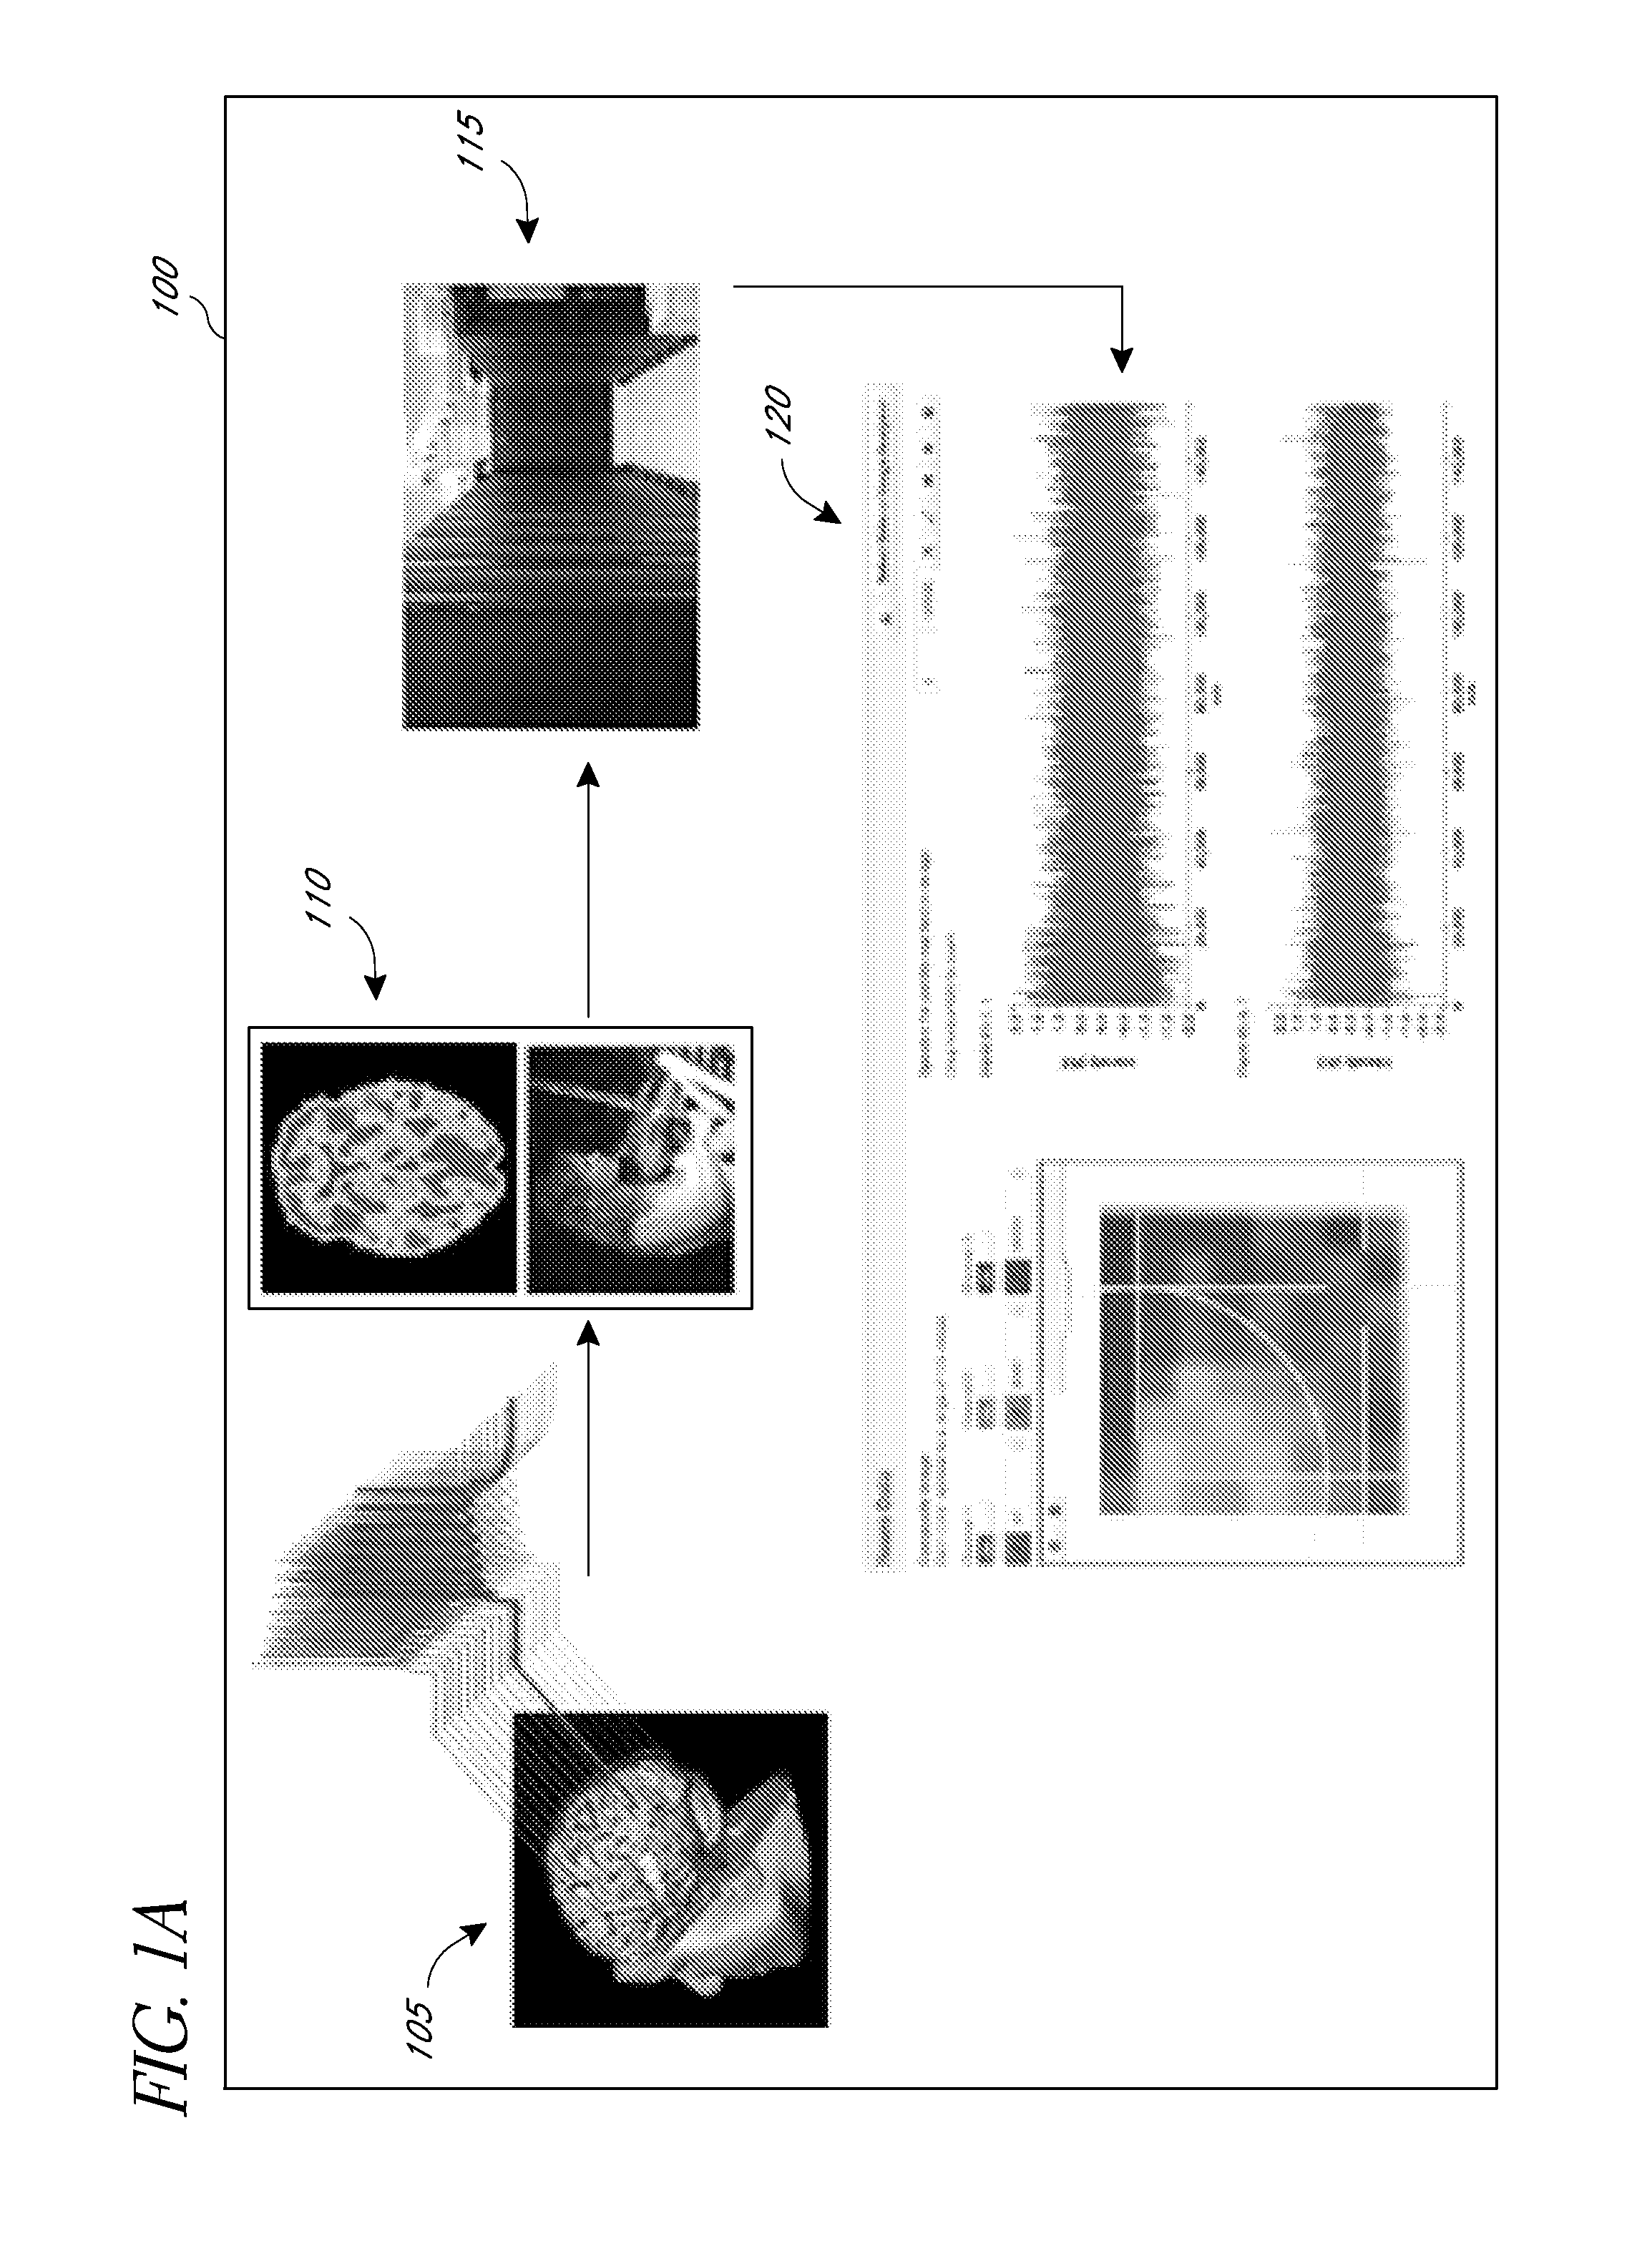 System and method of managing large data files